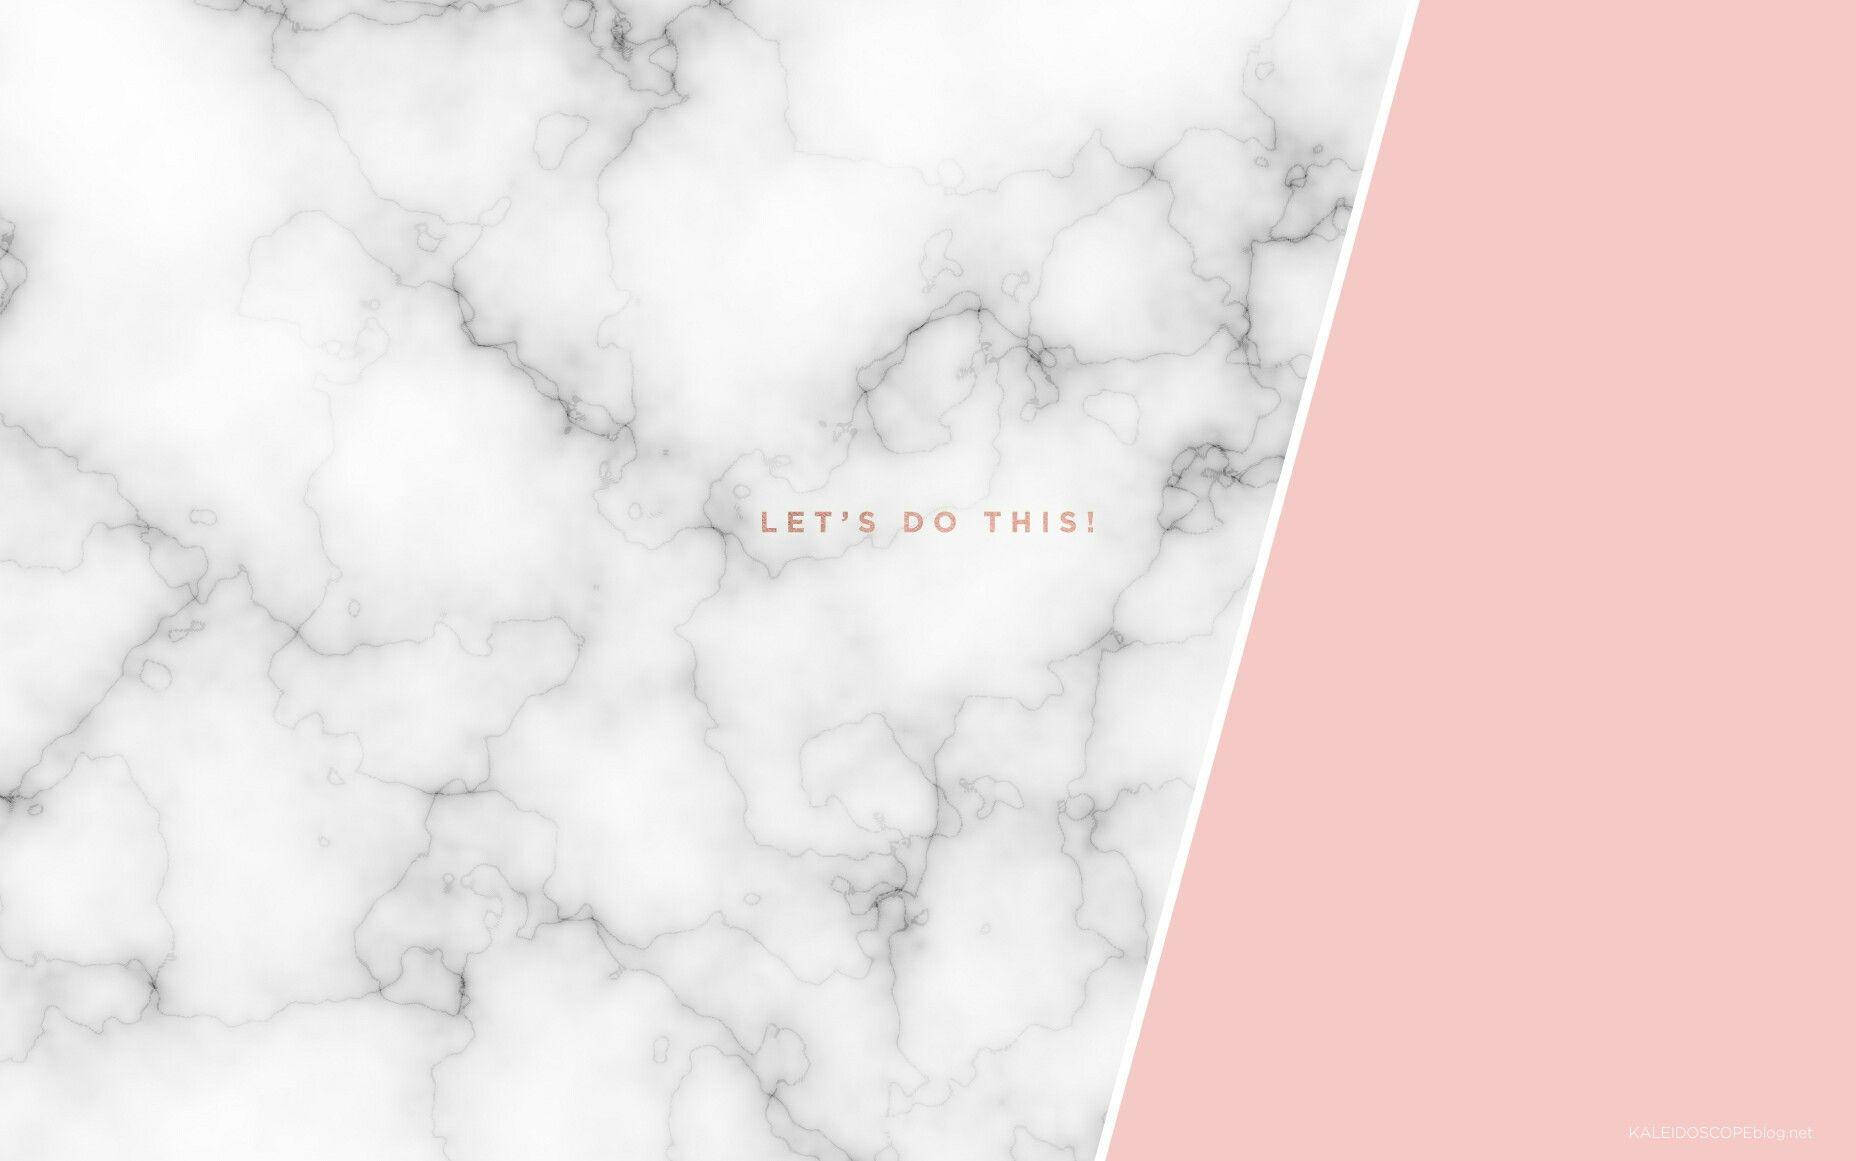 White Aesthetic Tumblr Marble Pink Let's Do This Wallpaper